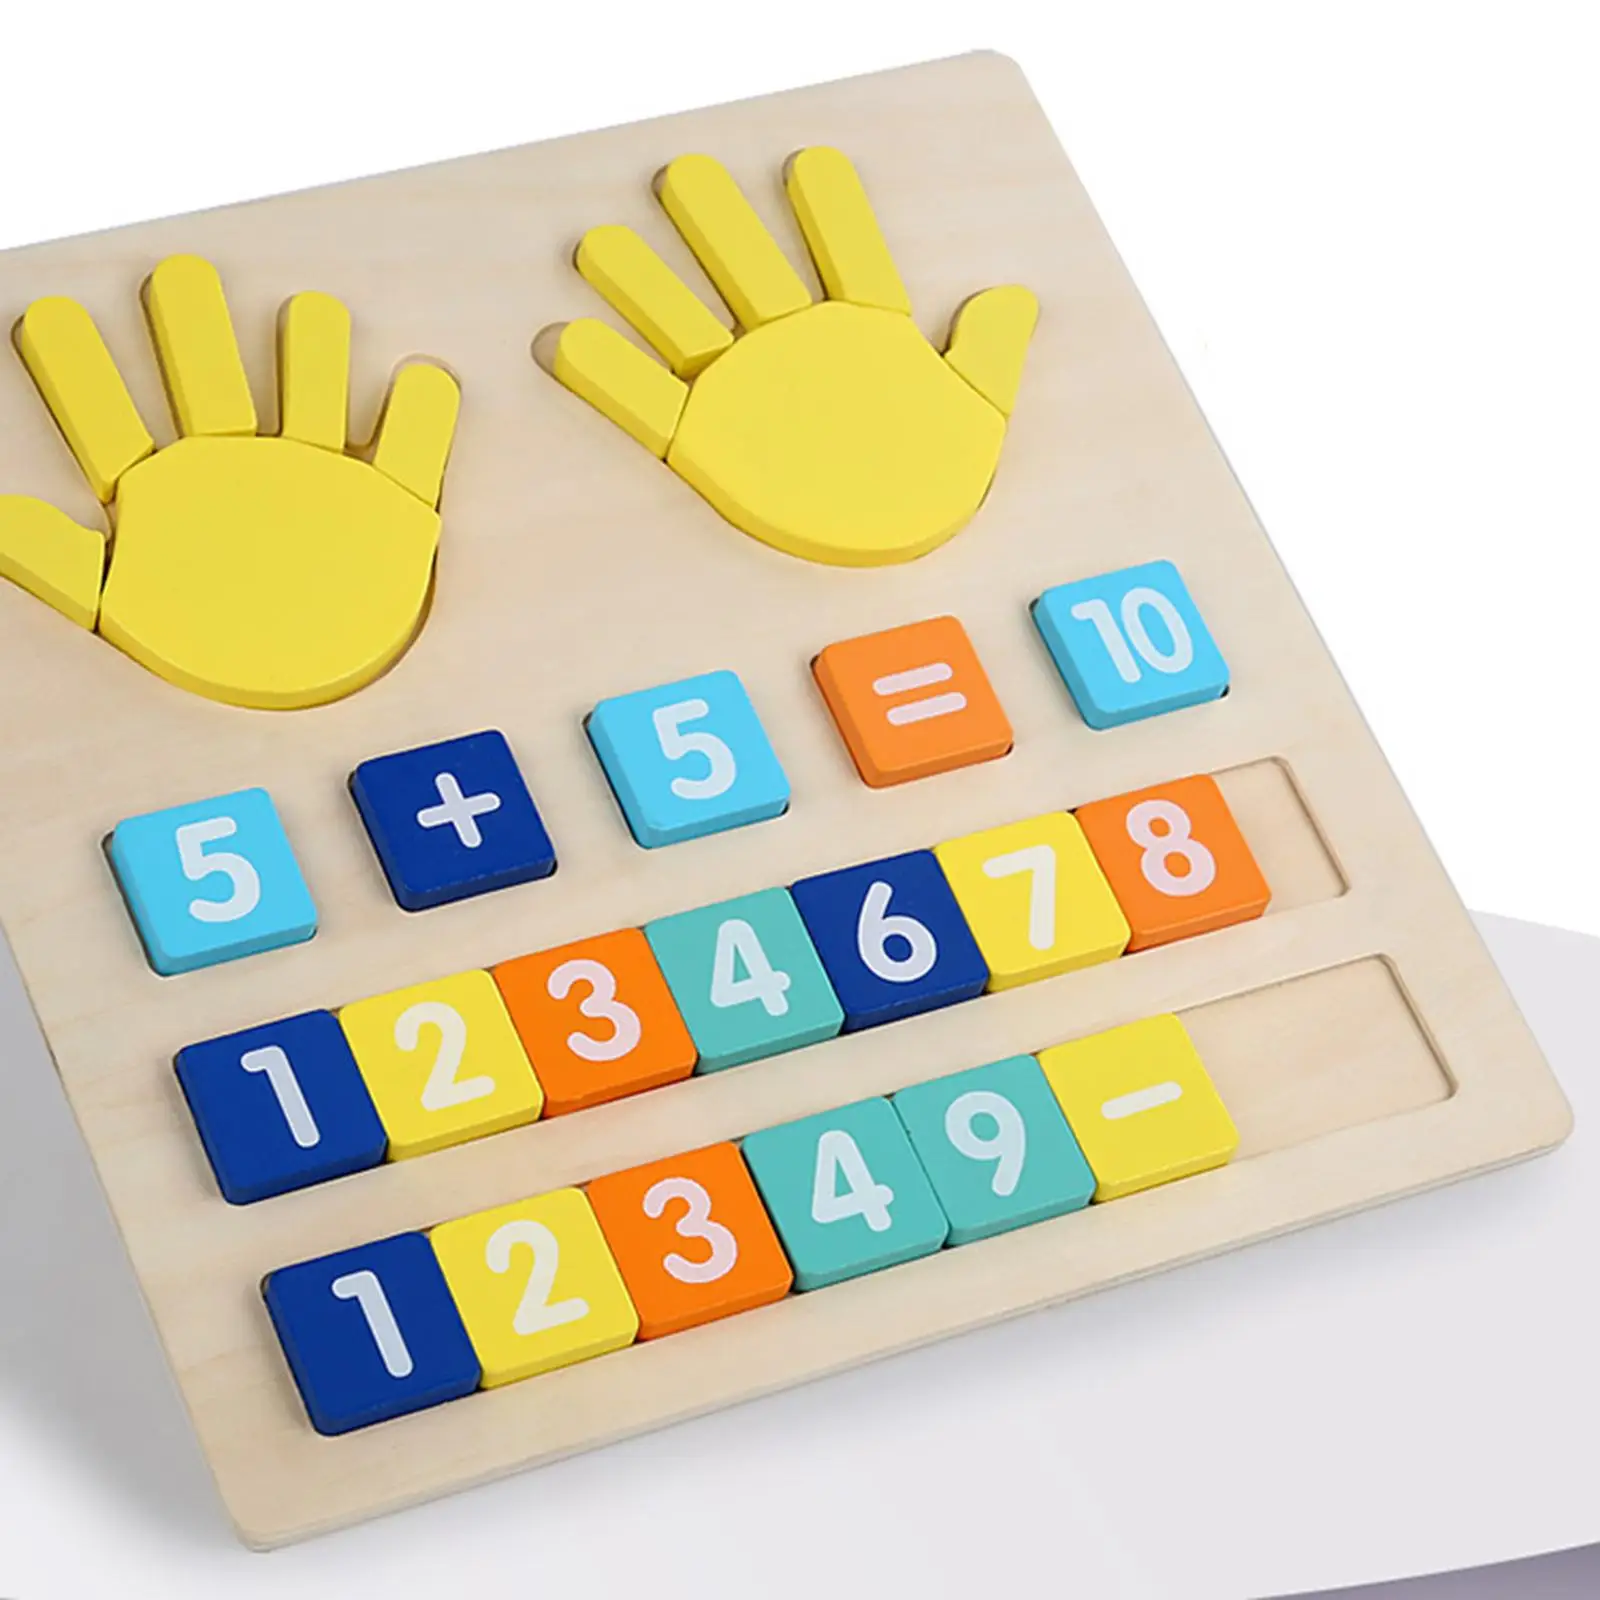 Mathematics Busy Board Montessori Montessori Math Toy Finger Numbers Counting Toy for Travel Toy Cognitive Development